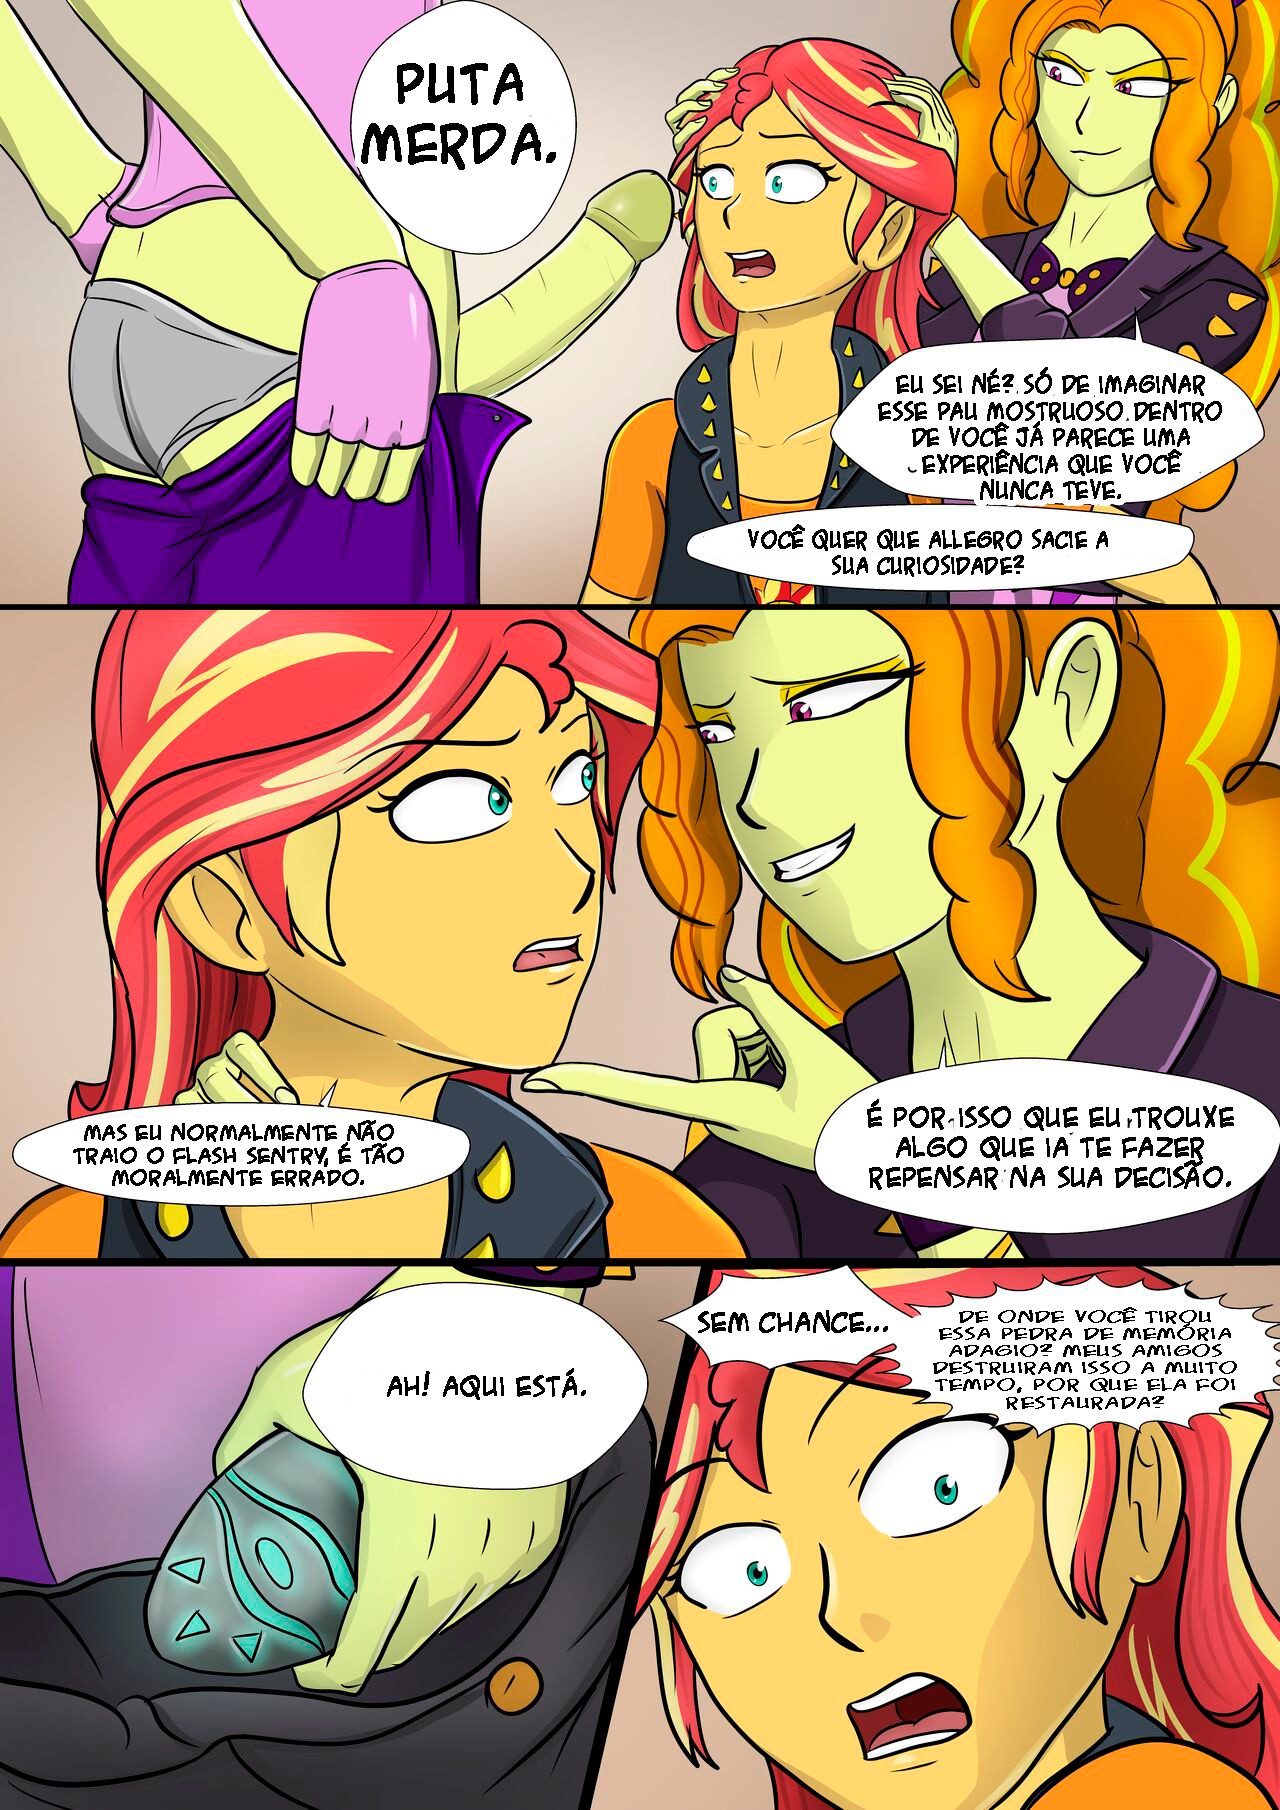 Sunsets Dilemma With Adagio Hentai pt-br 02